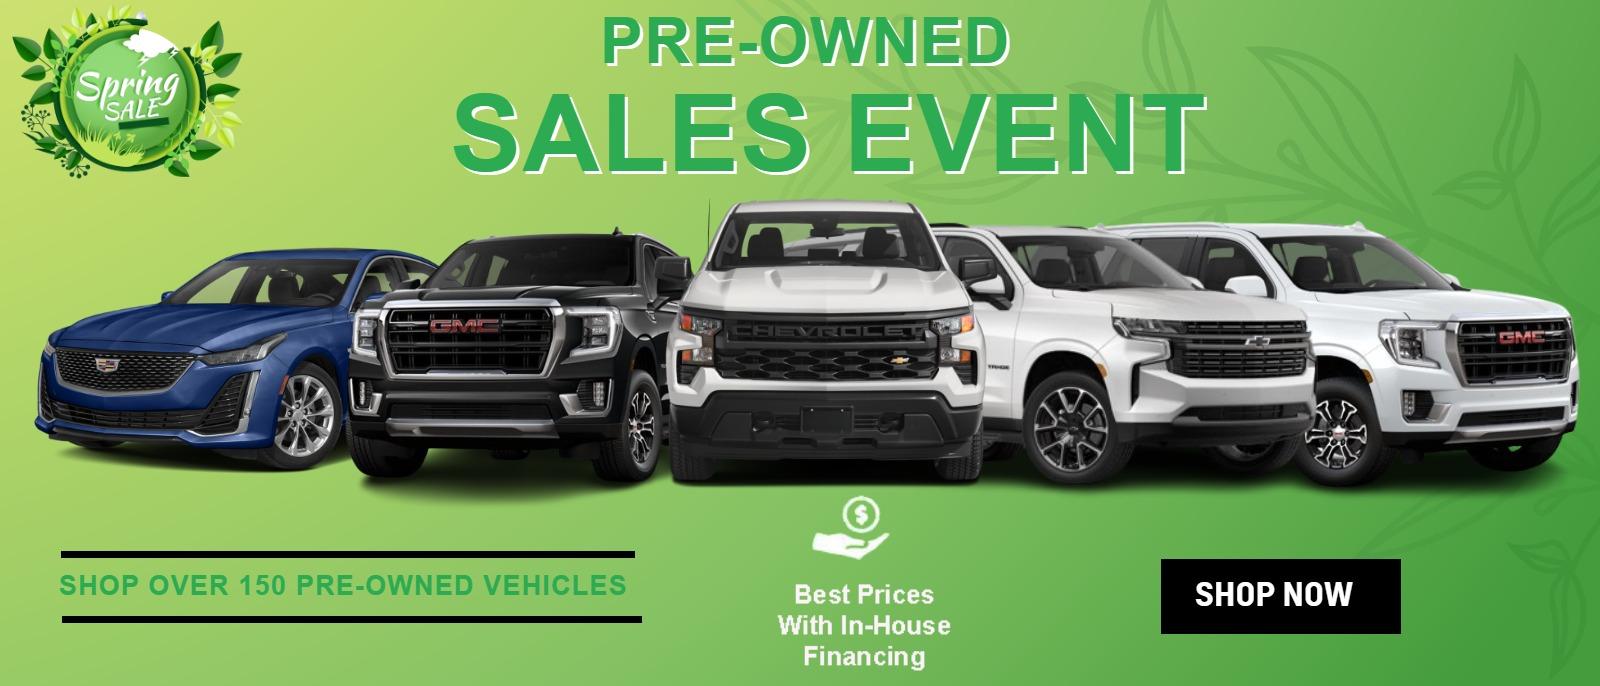 Over 140 Vehicles Available
Best Prices With In-House Financing